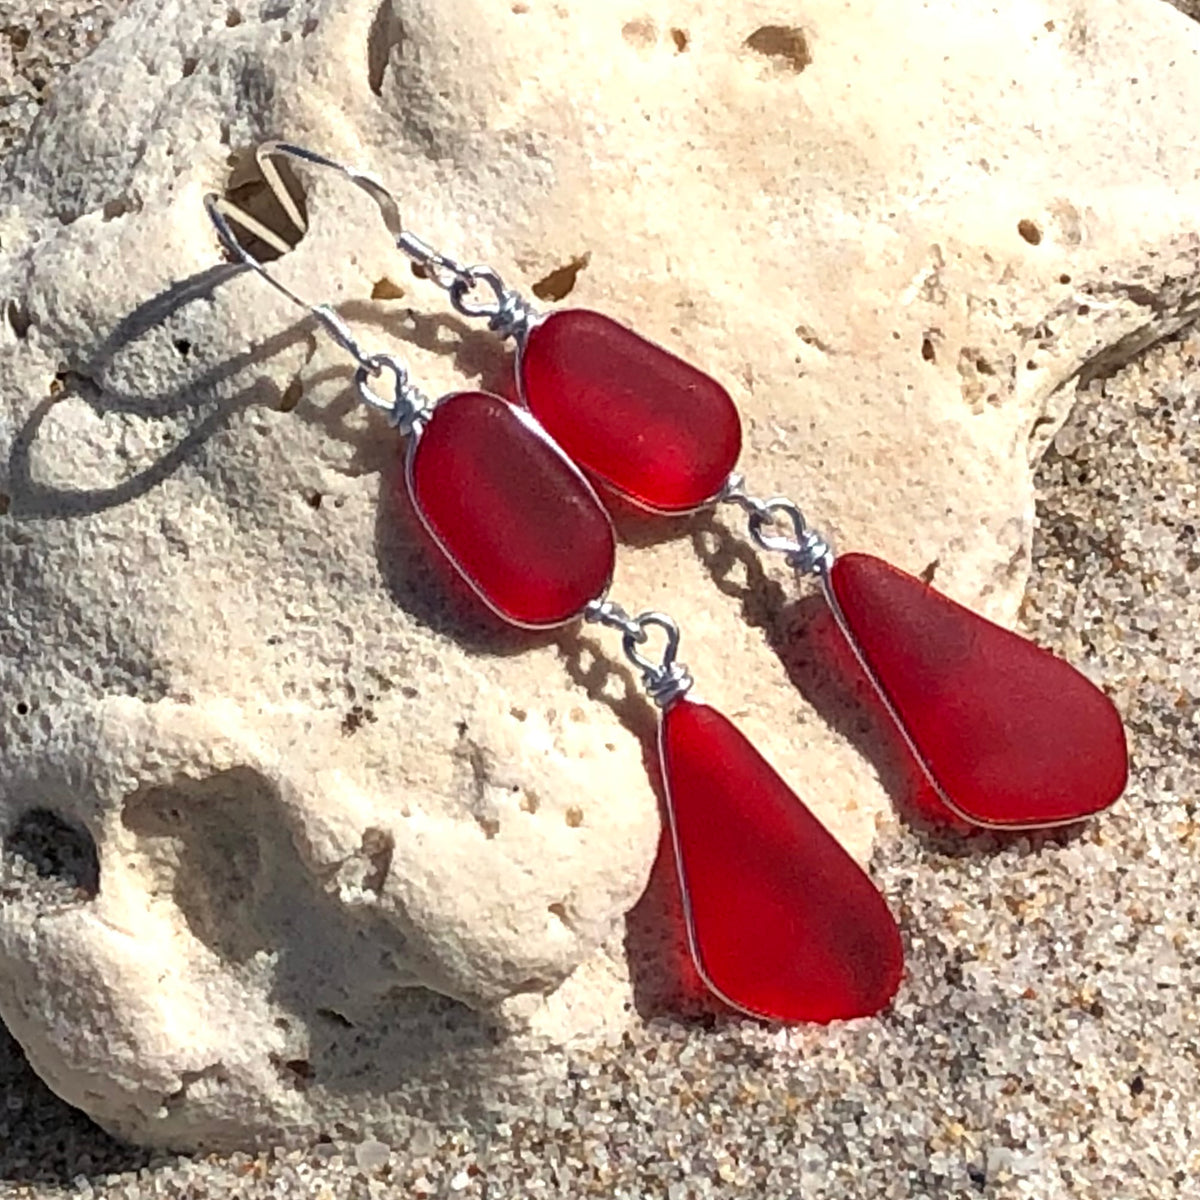 PASSION Red Double Sea Glass Earrings